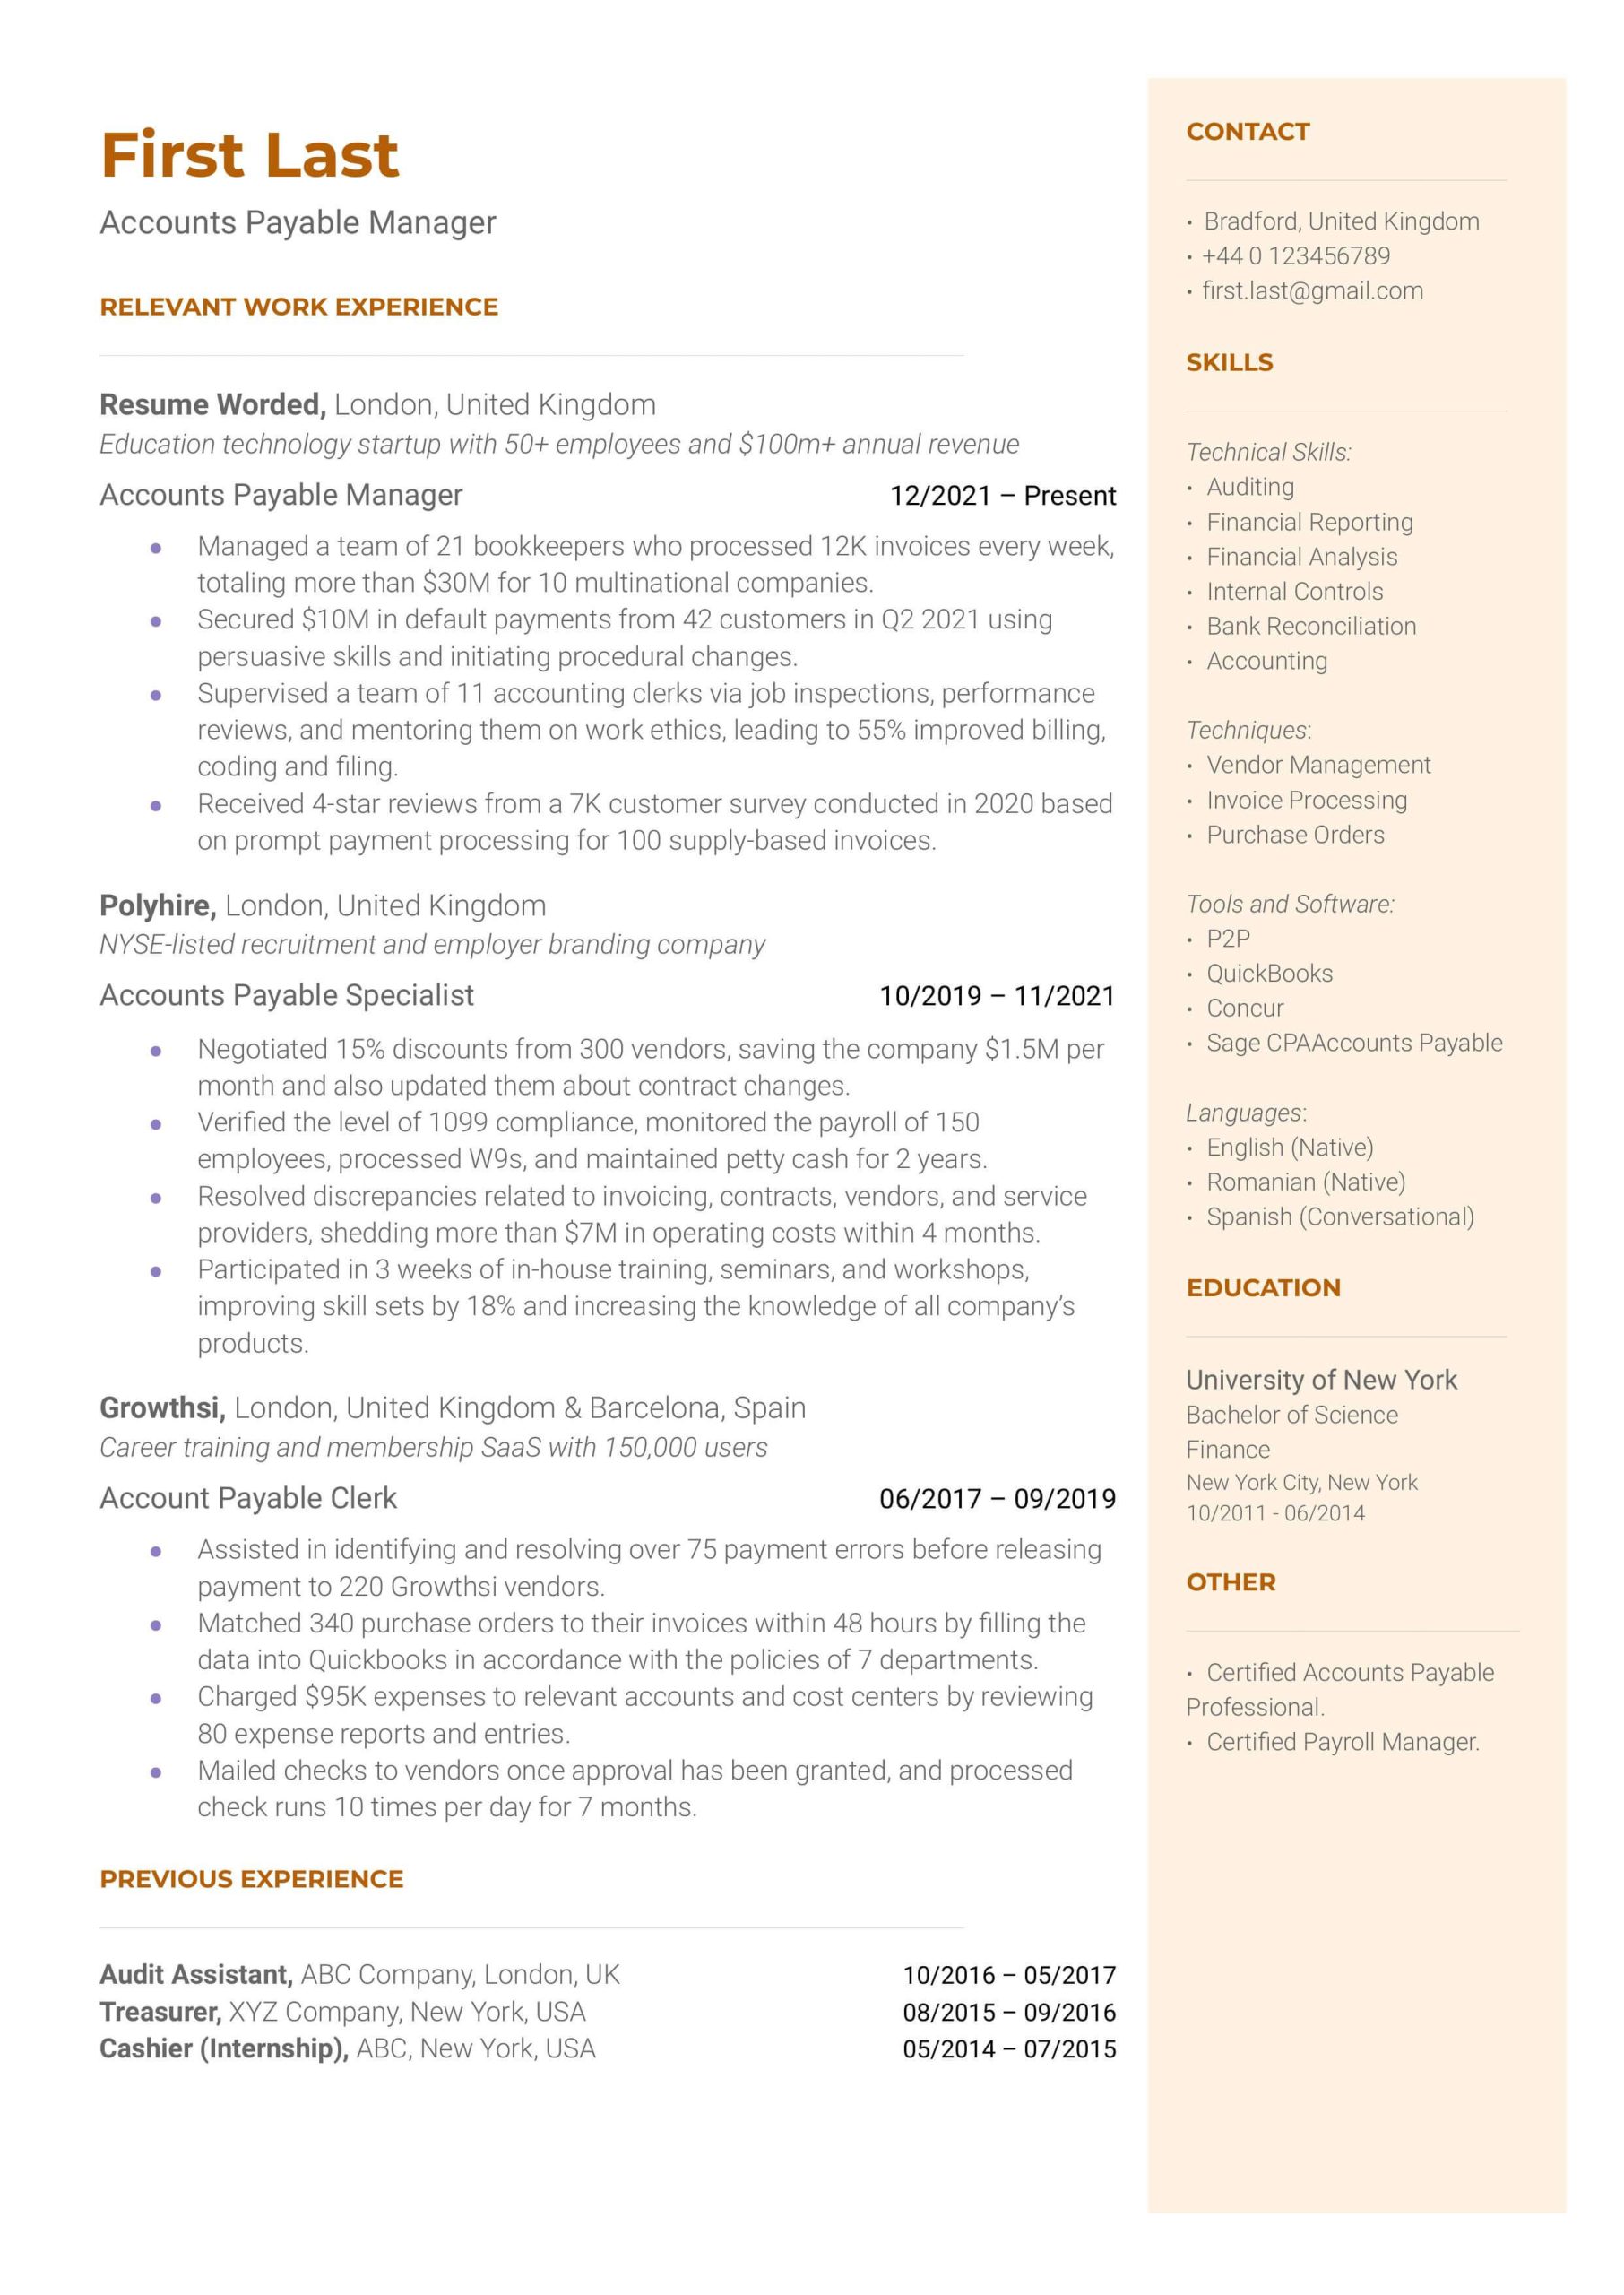 Sample Resume for A P Clerk 4 Accounts Payable Resume Examples for 2022 Resume Worded